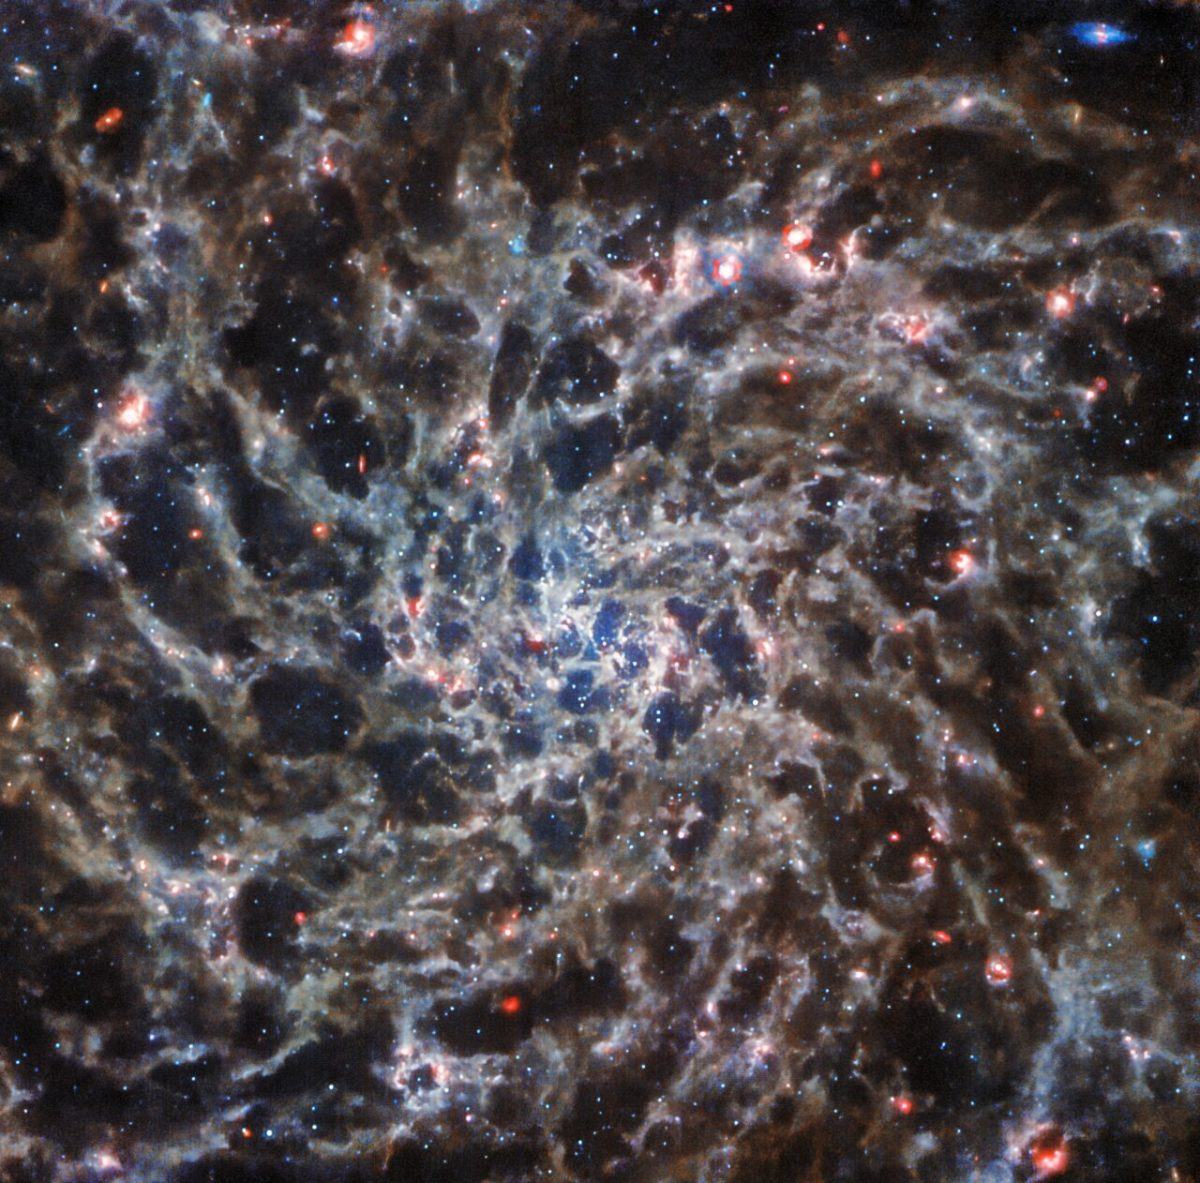 A detailed image of a spiral galaxy, with grey arms and red dots which are distant stars. The image was taken from the James Webb Space Telescope.